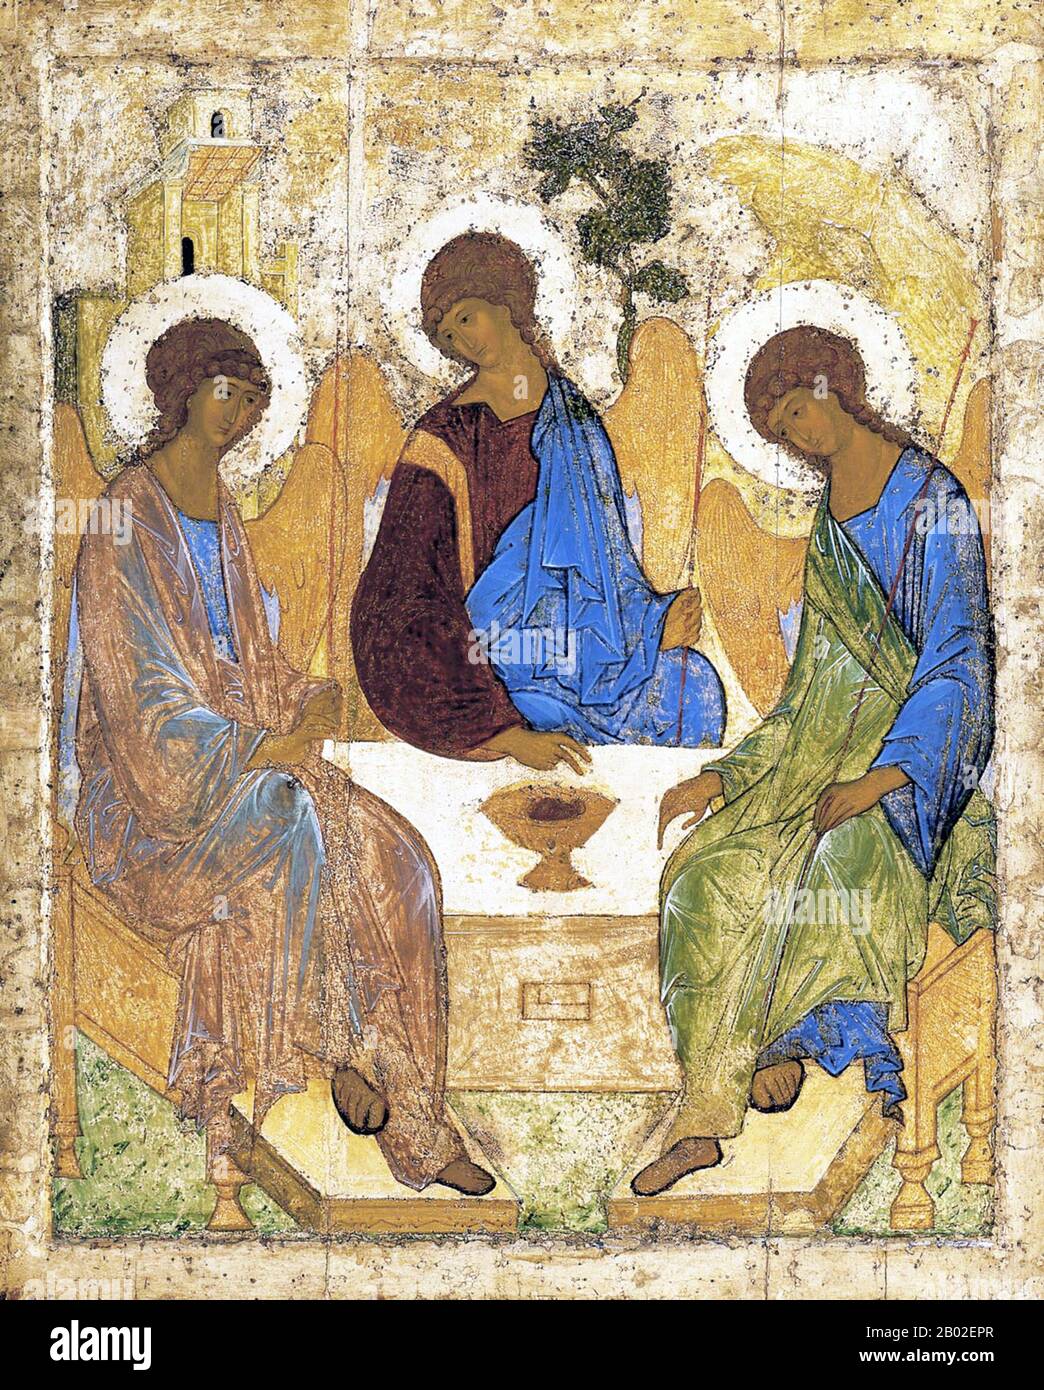 Trinity (Russian: Троица, also called 'Rublev's Trinity') is a Holy Trinity Icon, believed to have been created by Russian painter Andrei Rublev in the 15th century. It is his most famous work, as well regarded as one of the highest achievements of Russian art. Trinity depicts the three angels who visited Abraham at the oak of Mamre (see Genesis 18,1-15), but the painting is full of symbolism and often interpreted as an icon of the Holy Trinity.  The original is currently held in the Tretyakov Gallery in Moscow. It was commissioned in honor of the abbot Sergius of the Troitse-Sergiyeva Lavra, Stock Photo